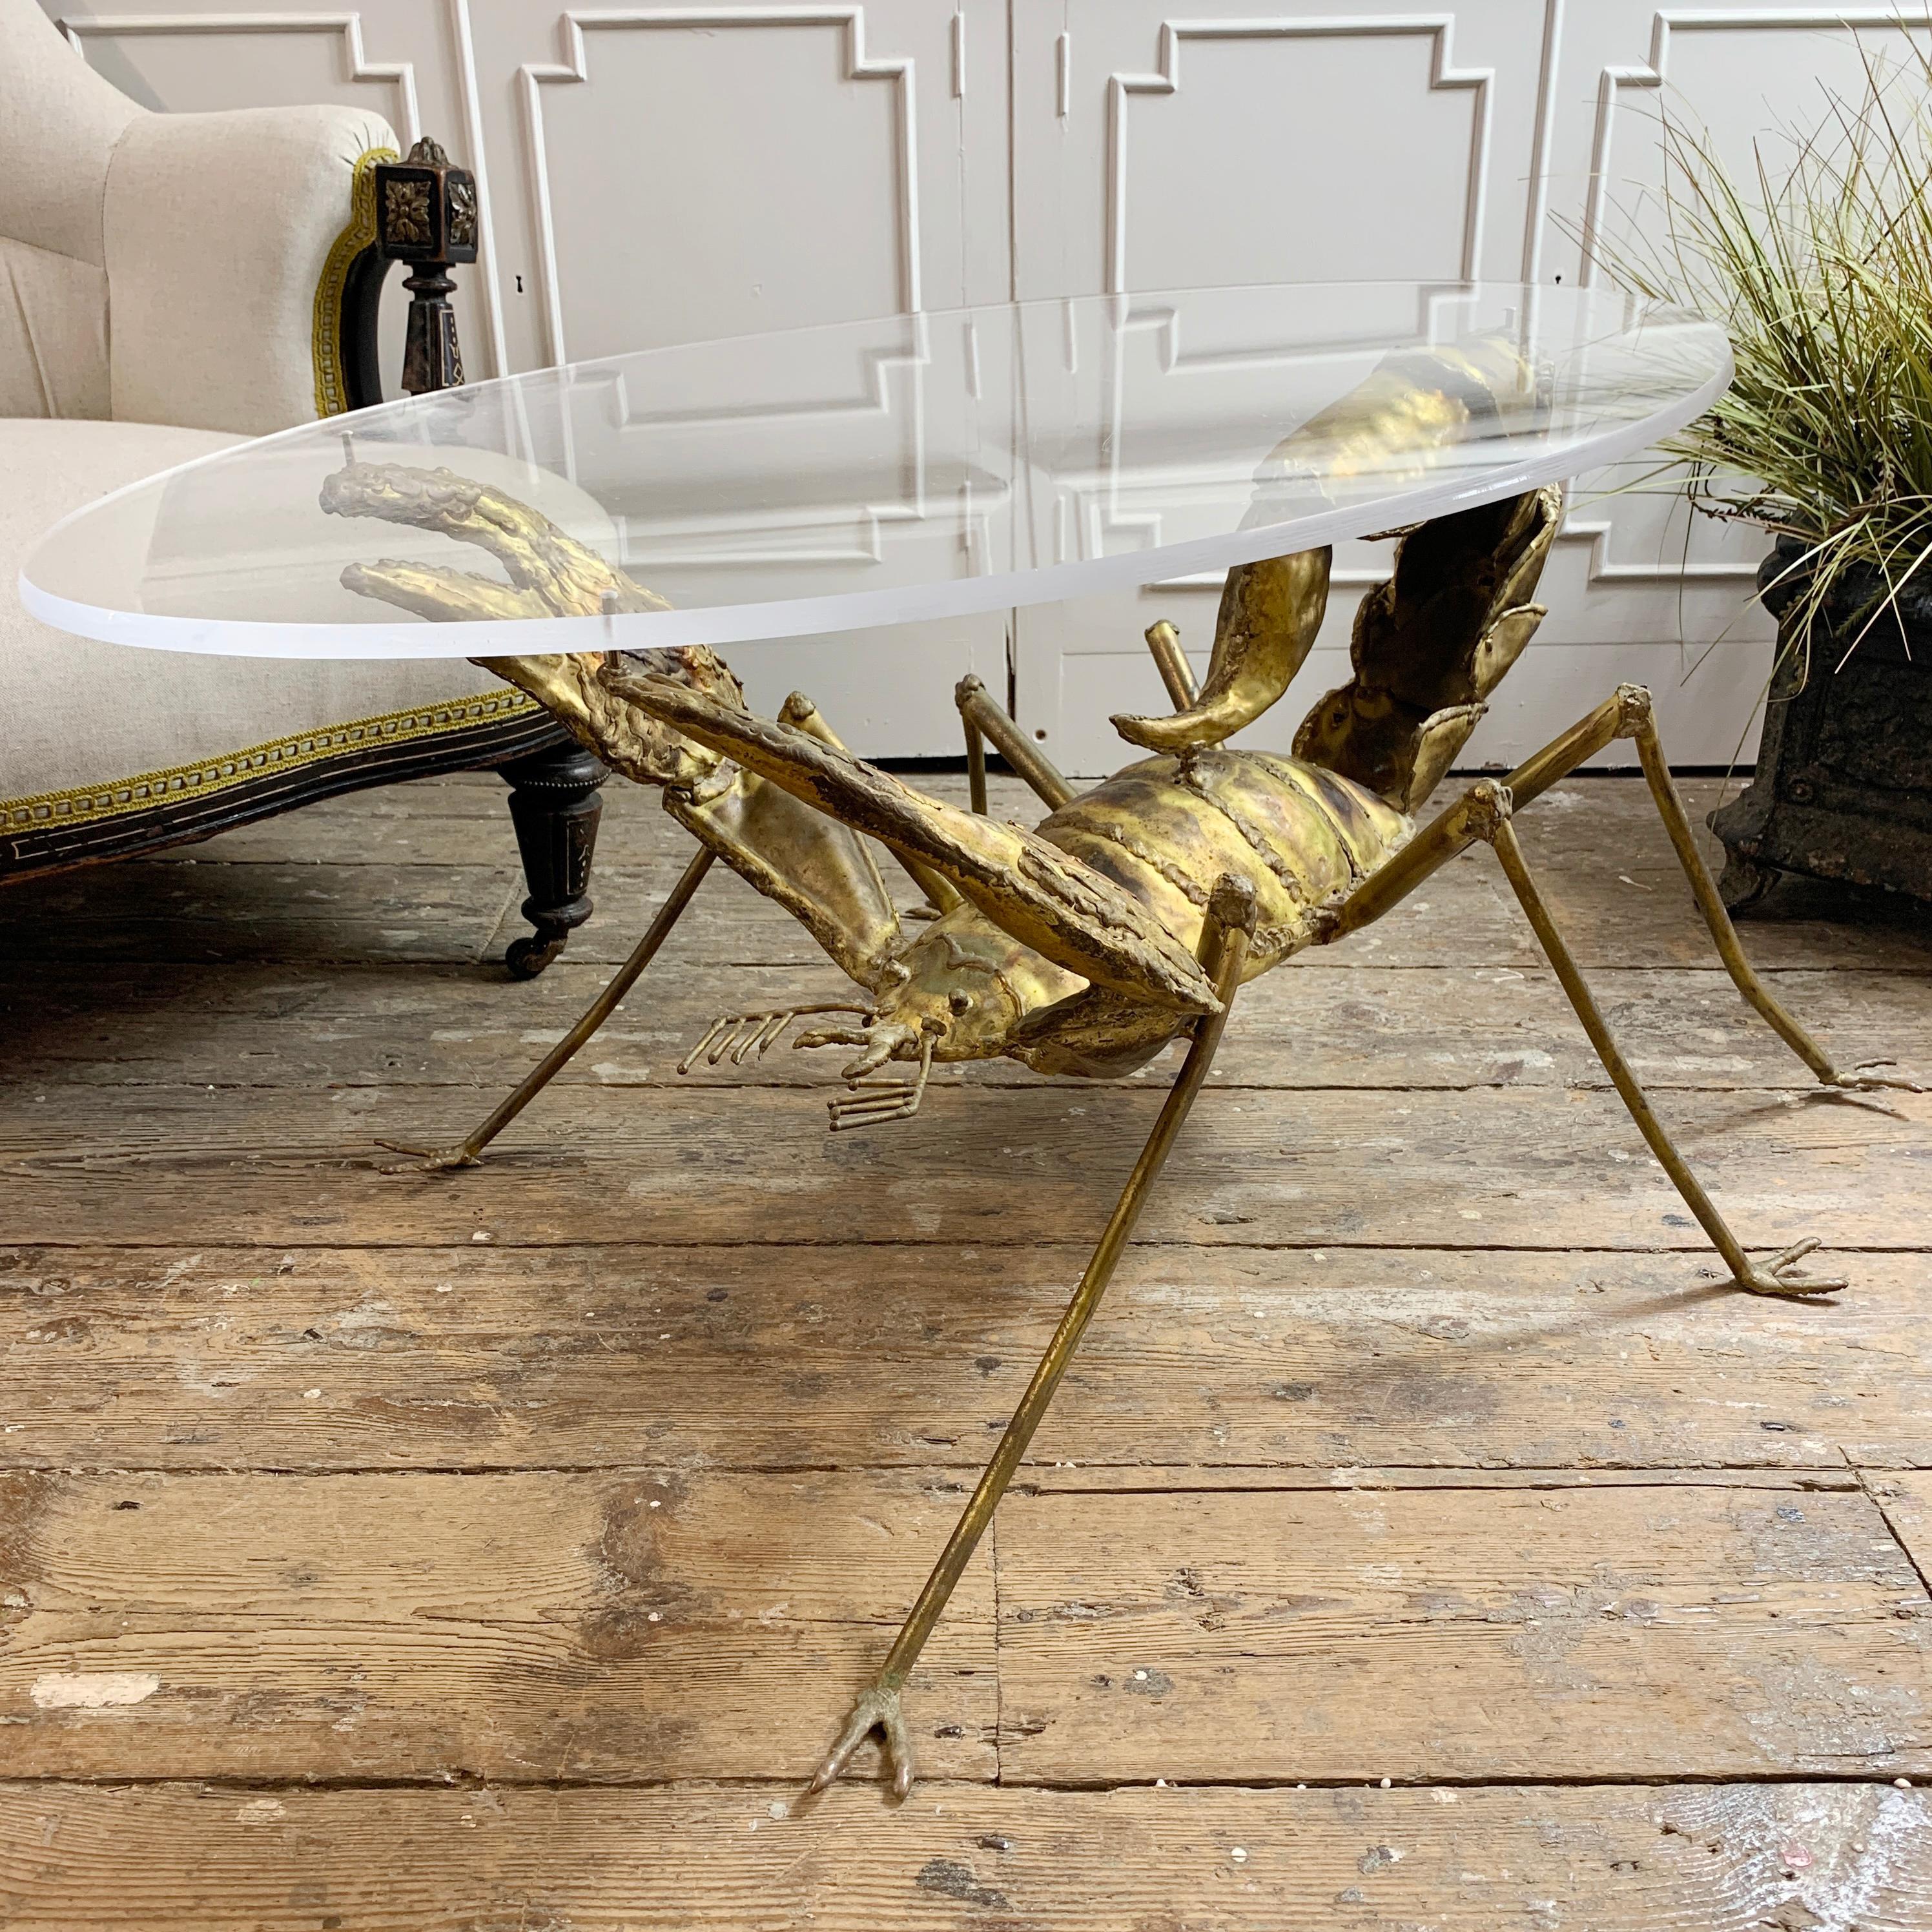 An exceptional brass and steel Scorpion table created by the renowned French Sculptor and Artist, Francois Melin in the 1970s'. The table has been hand crafted by Melin using individual pieces of brass, shaped to form the various sections of the